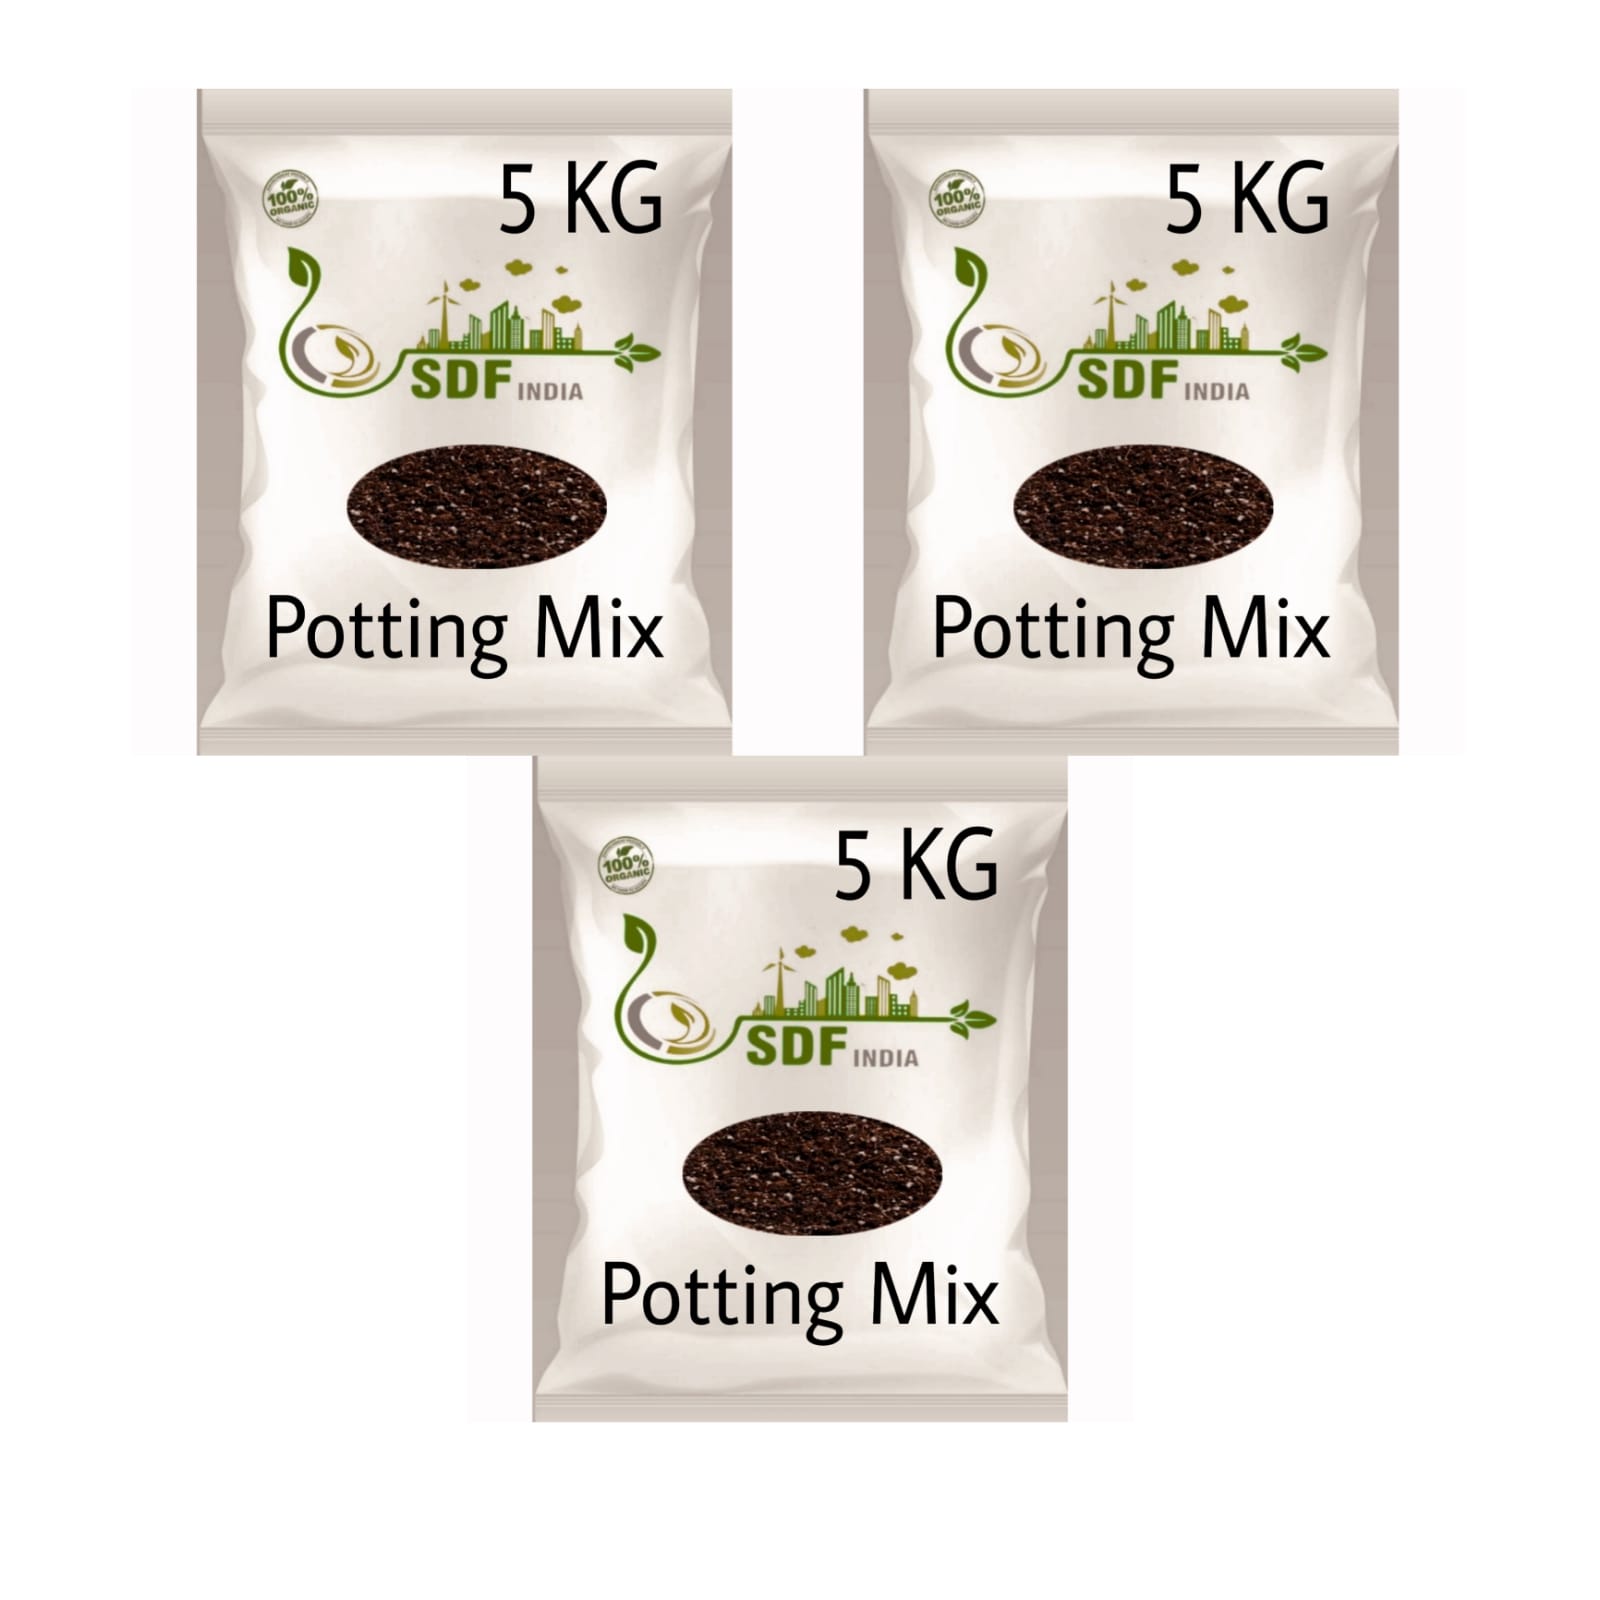 SDFindia  15 KG Potting Mix 3 PACK OF 5KG